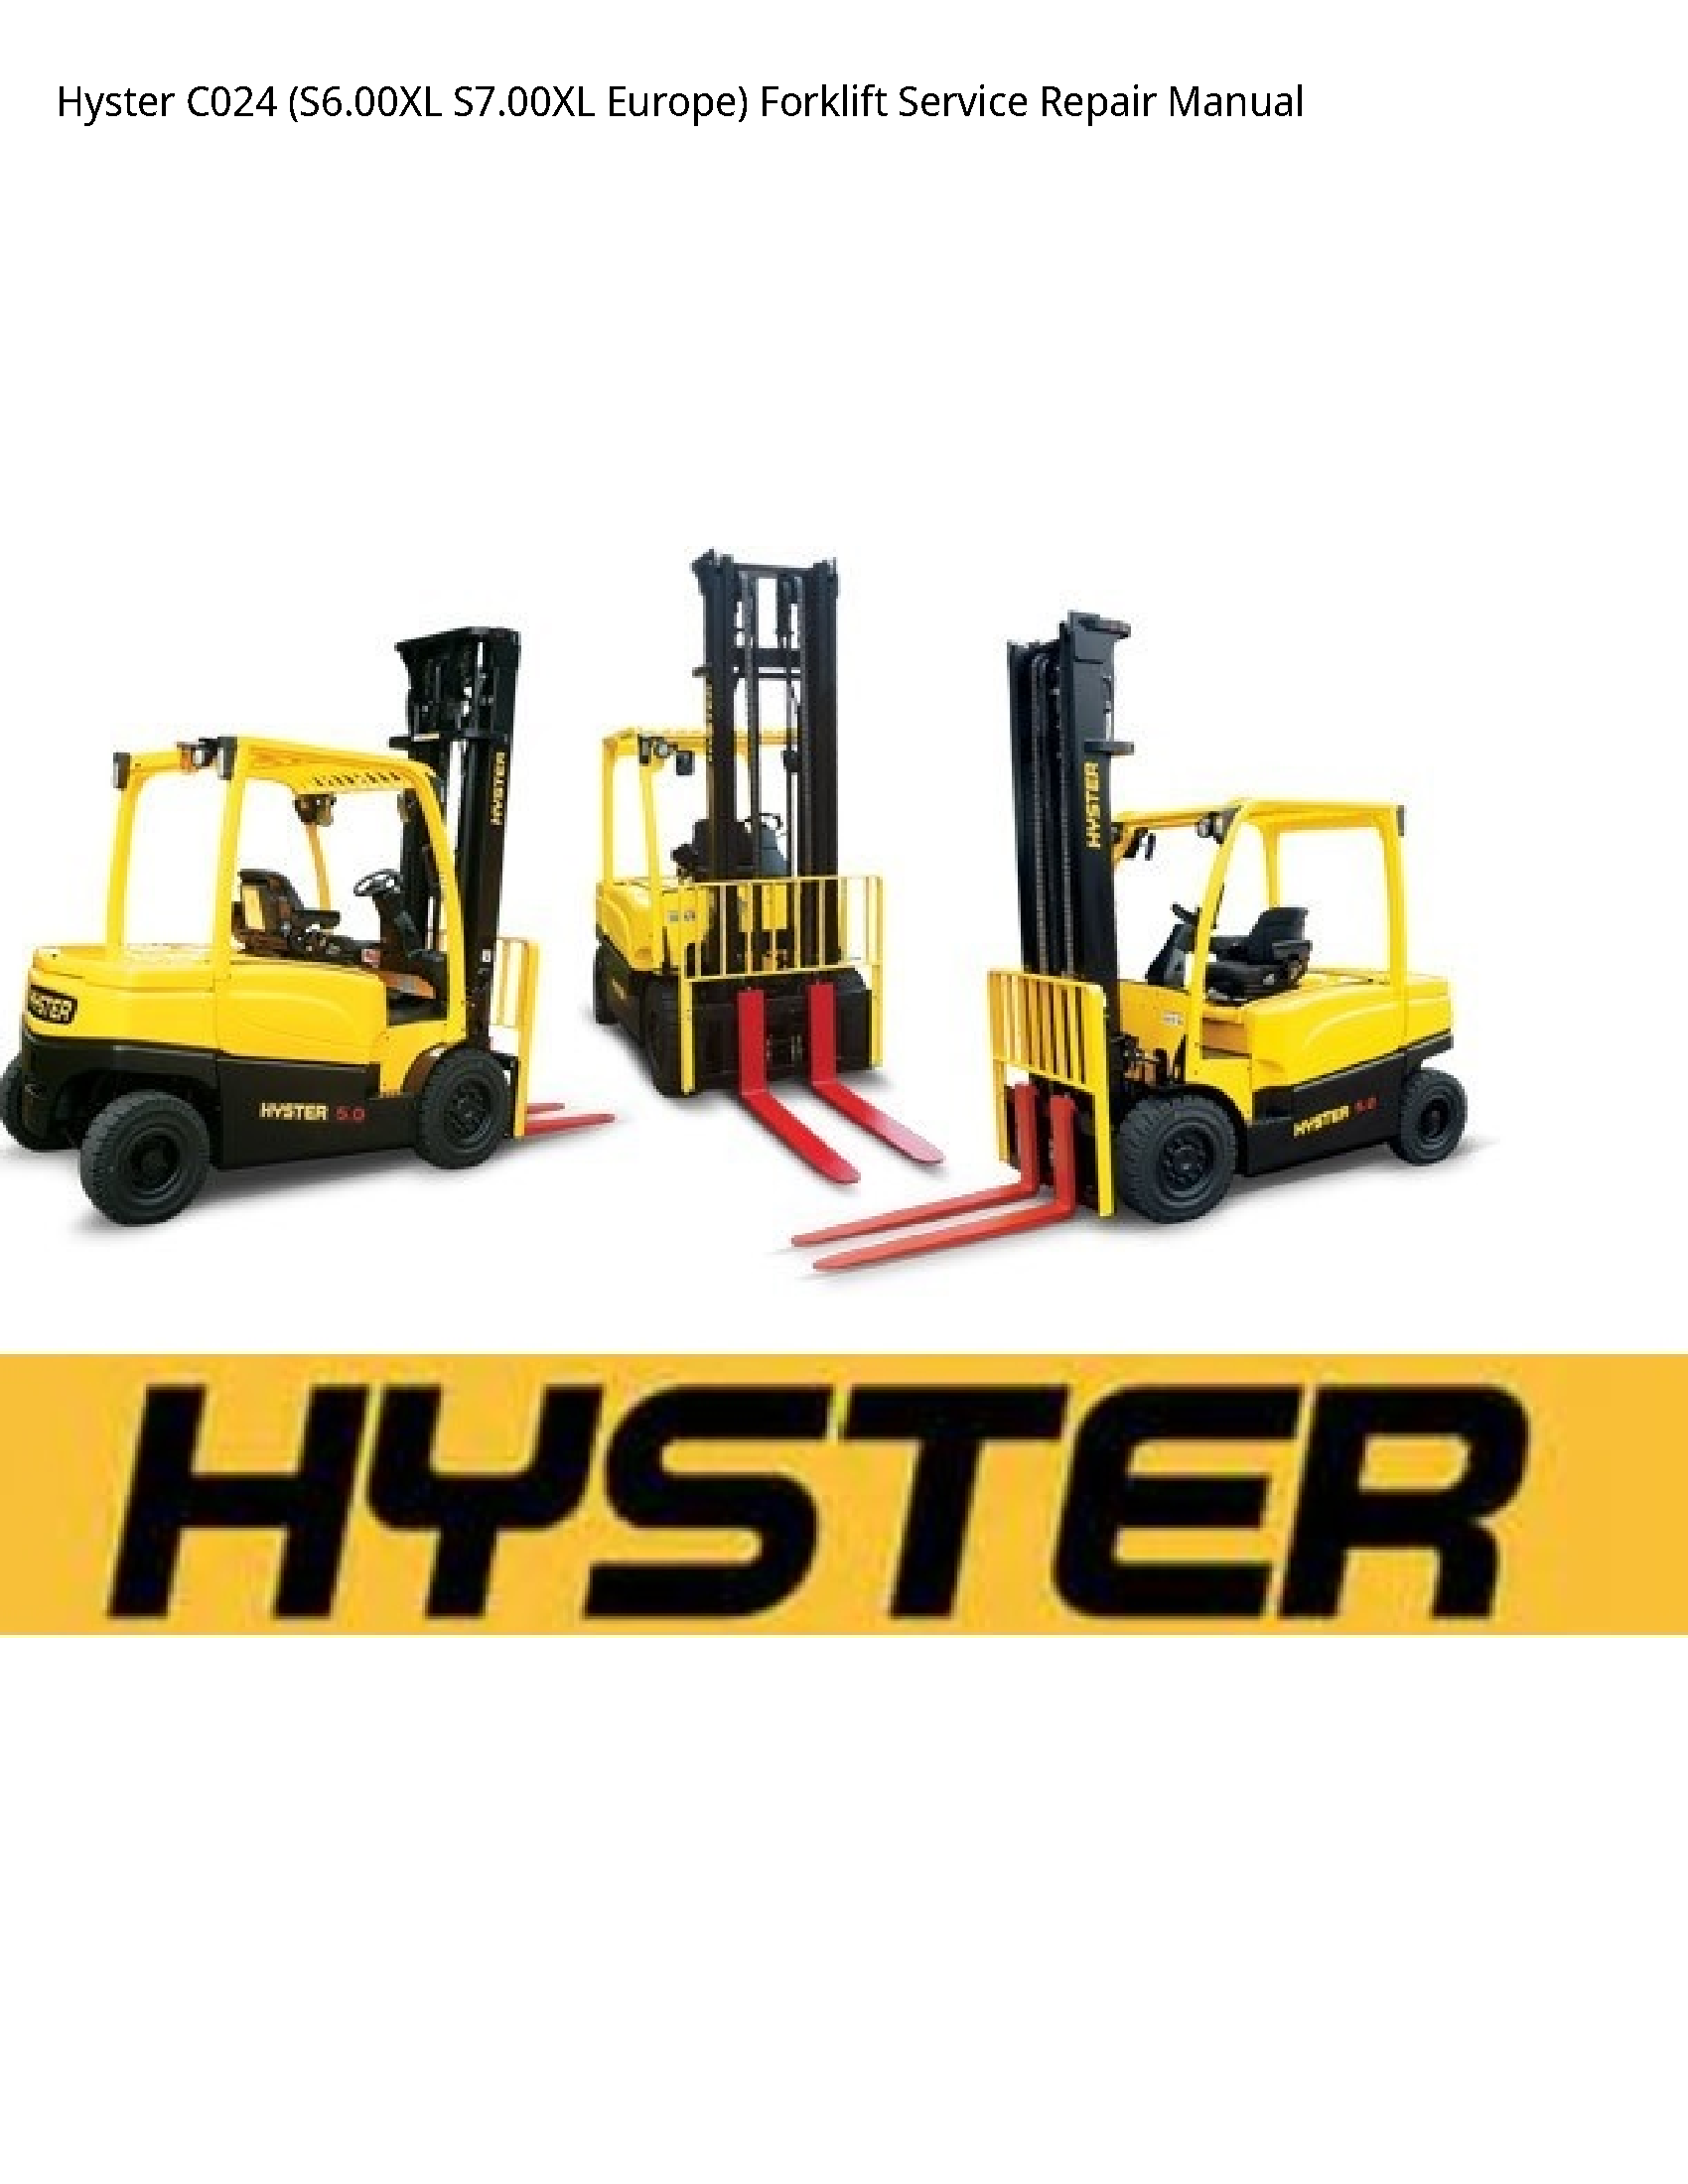 Hyster C024 Europe) Forklift manual